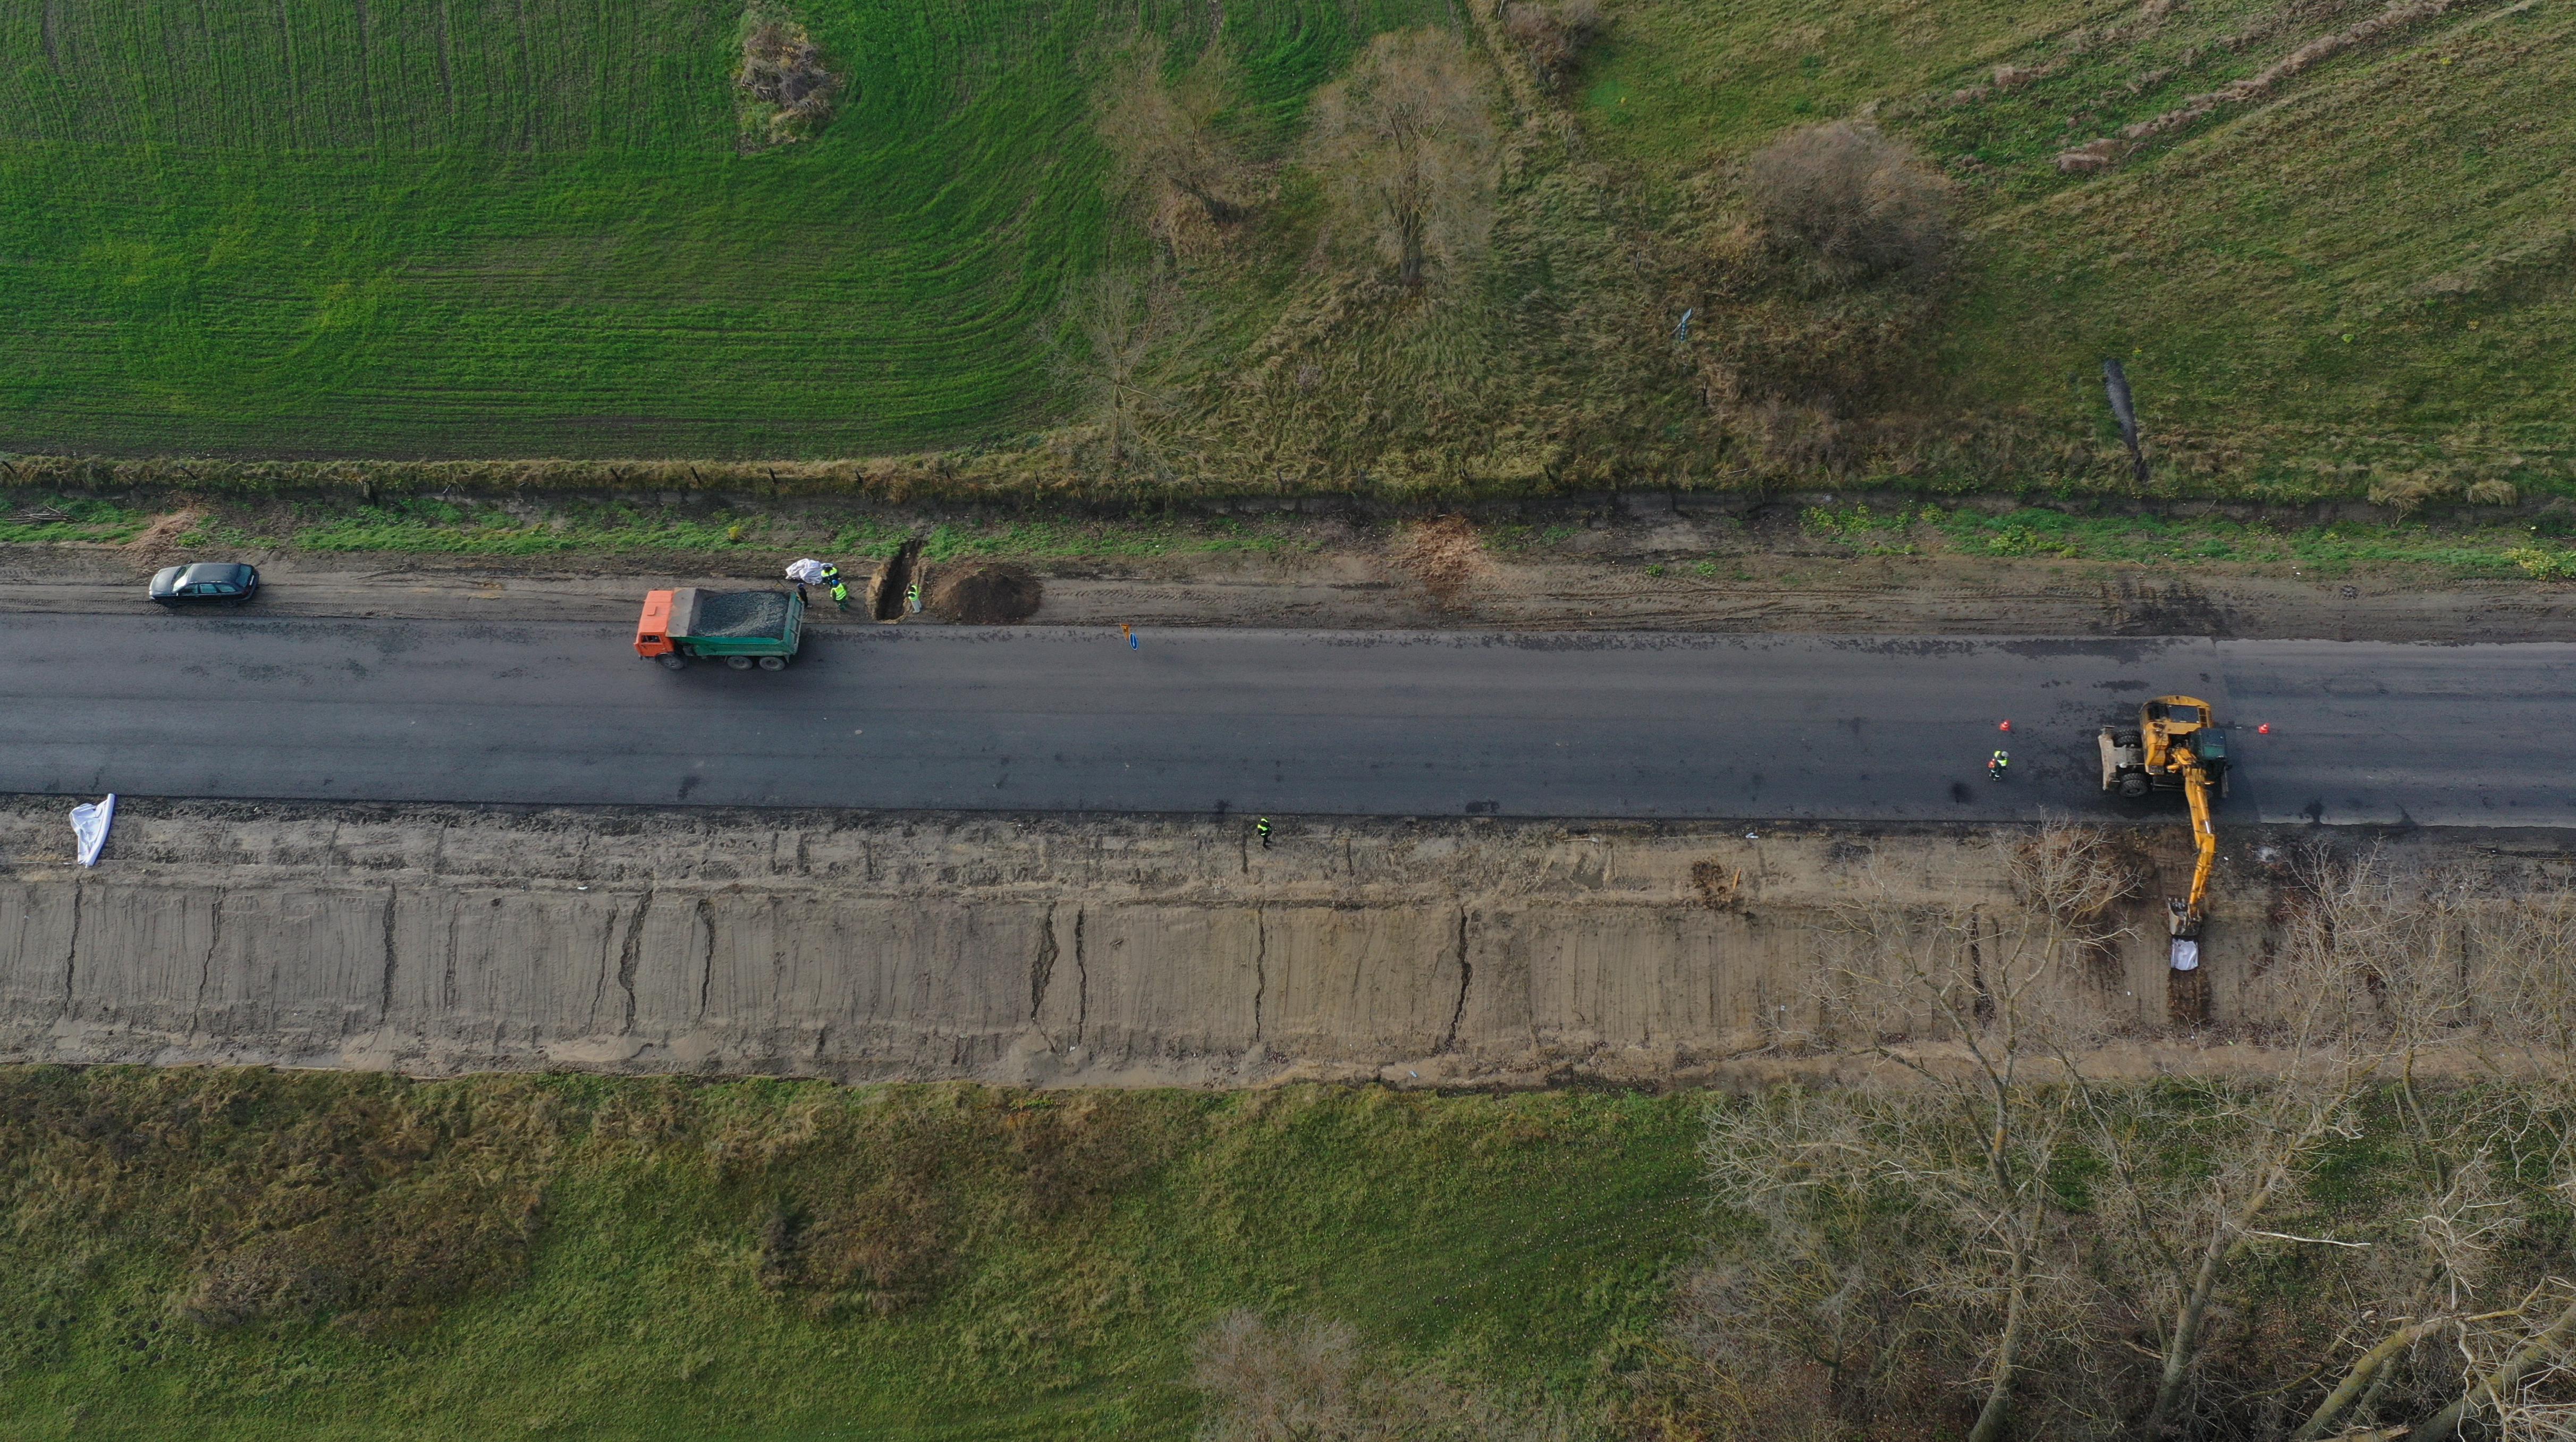 "PBS" repairing another section of M-19 road in Volyn region